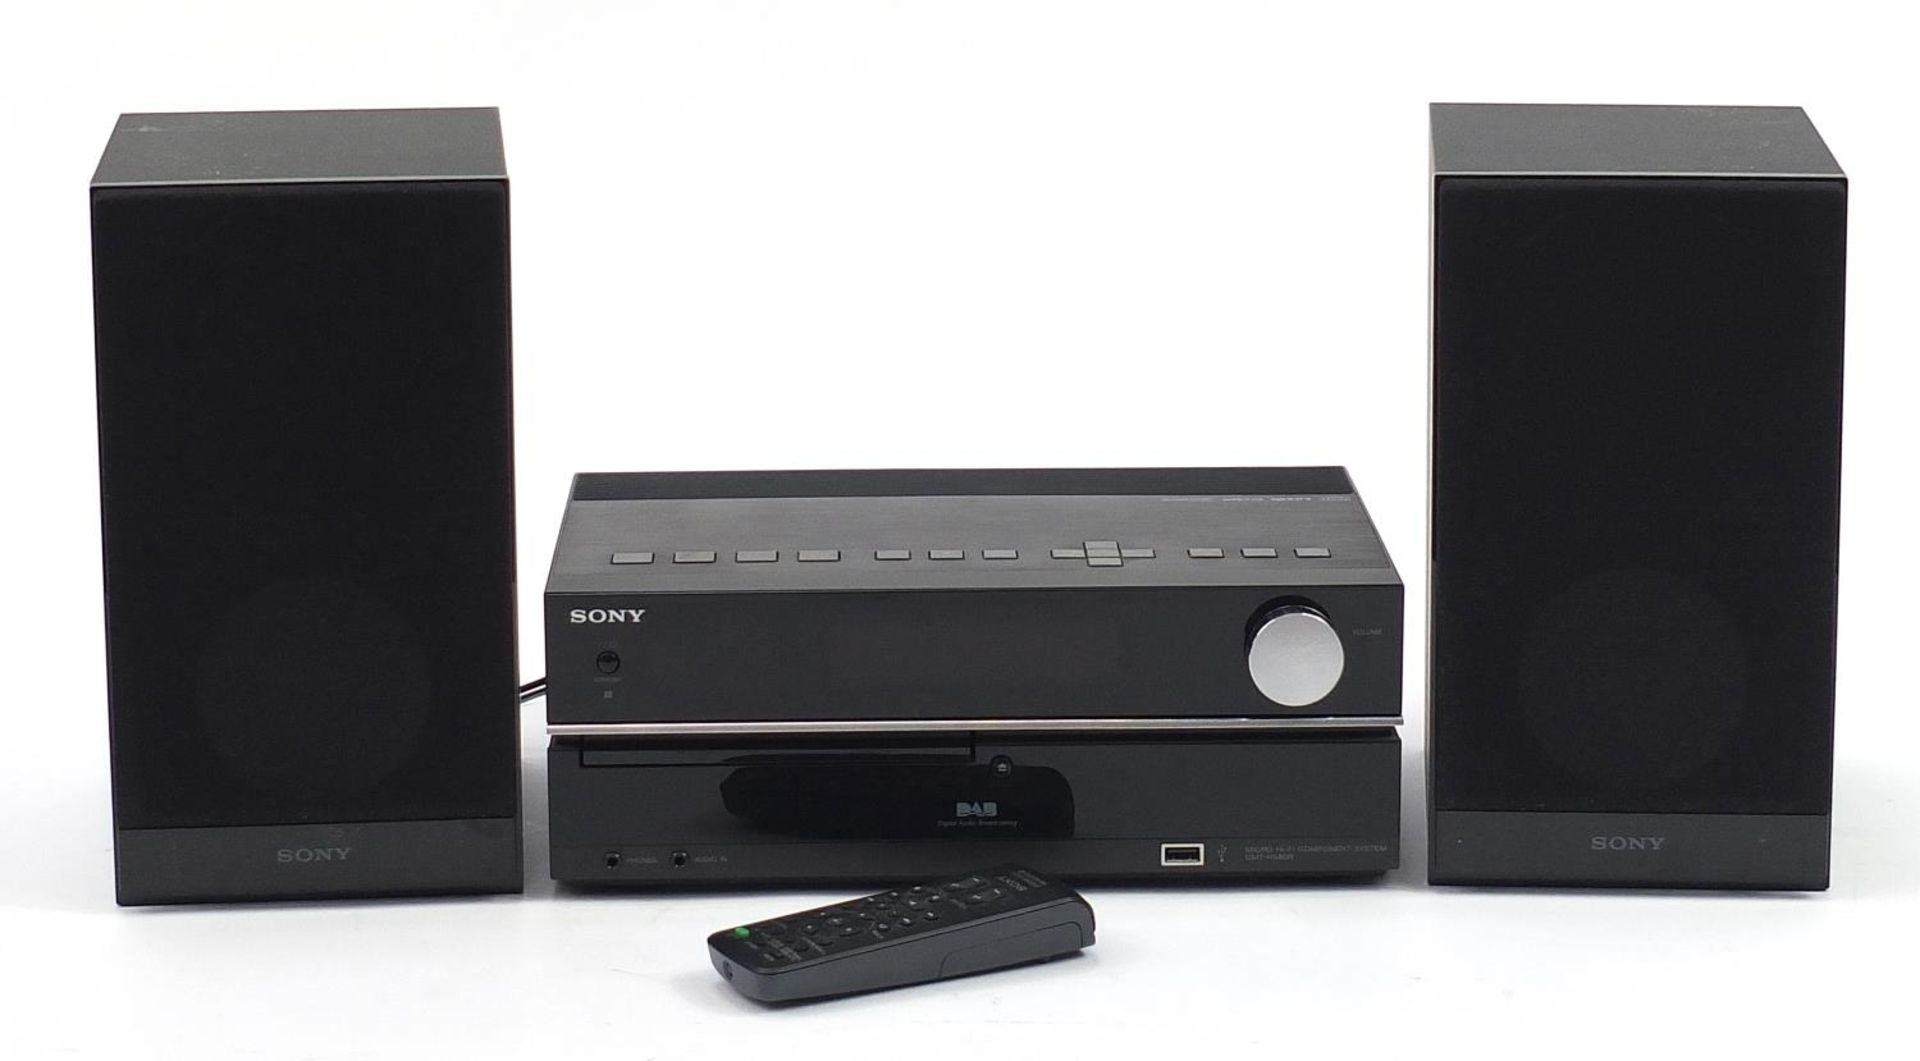 Sony Micro HiFi component system with speakers and box, model CMT-HX80R